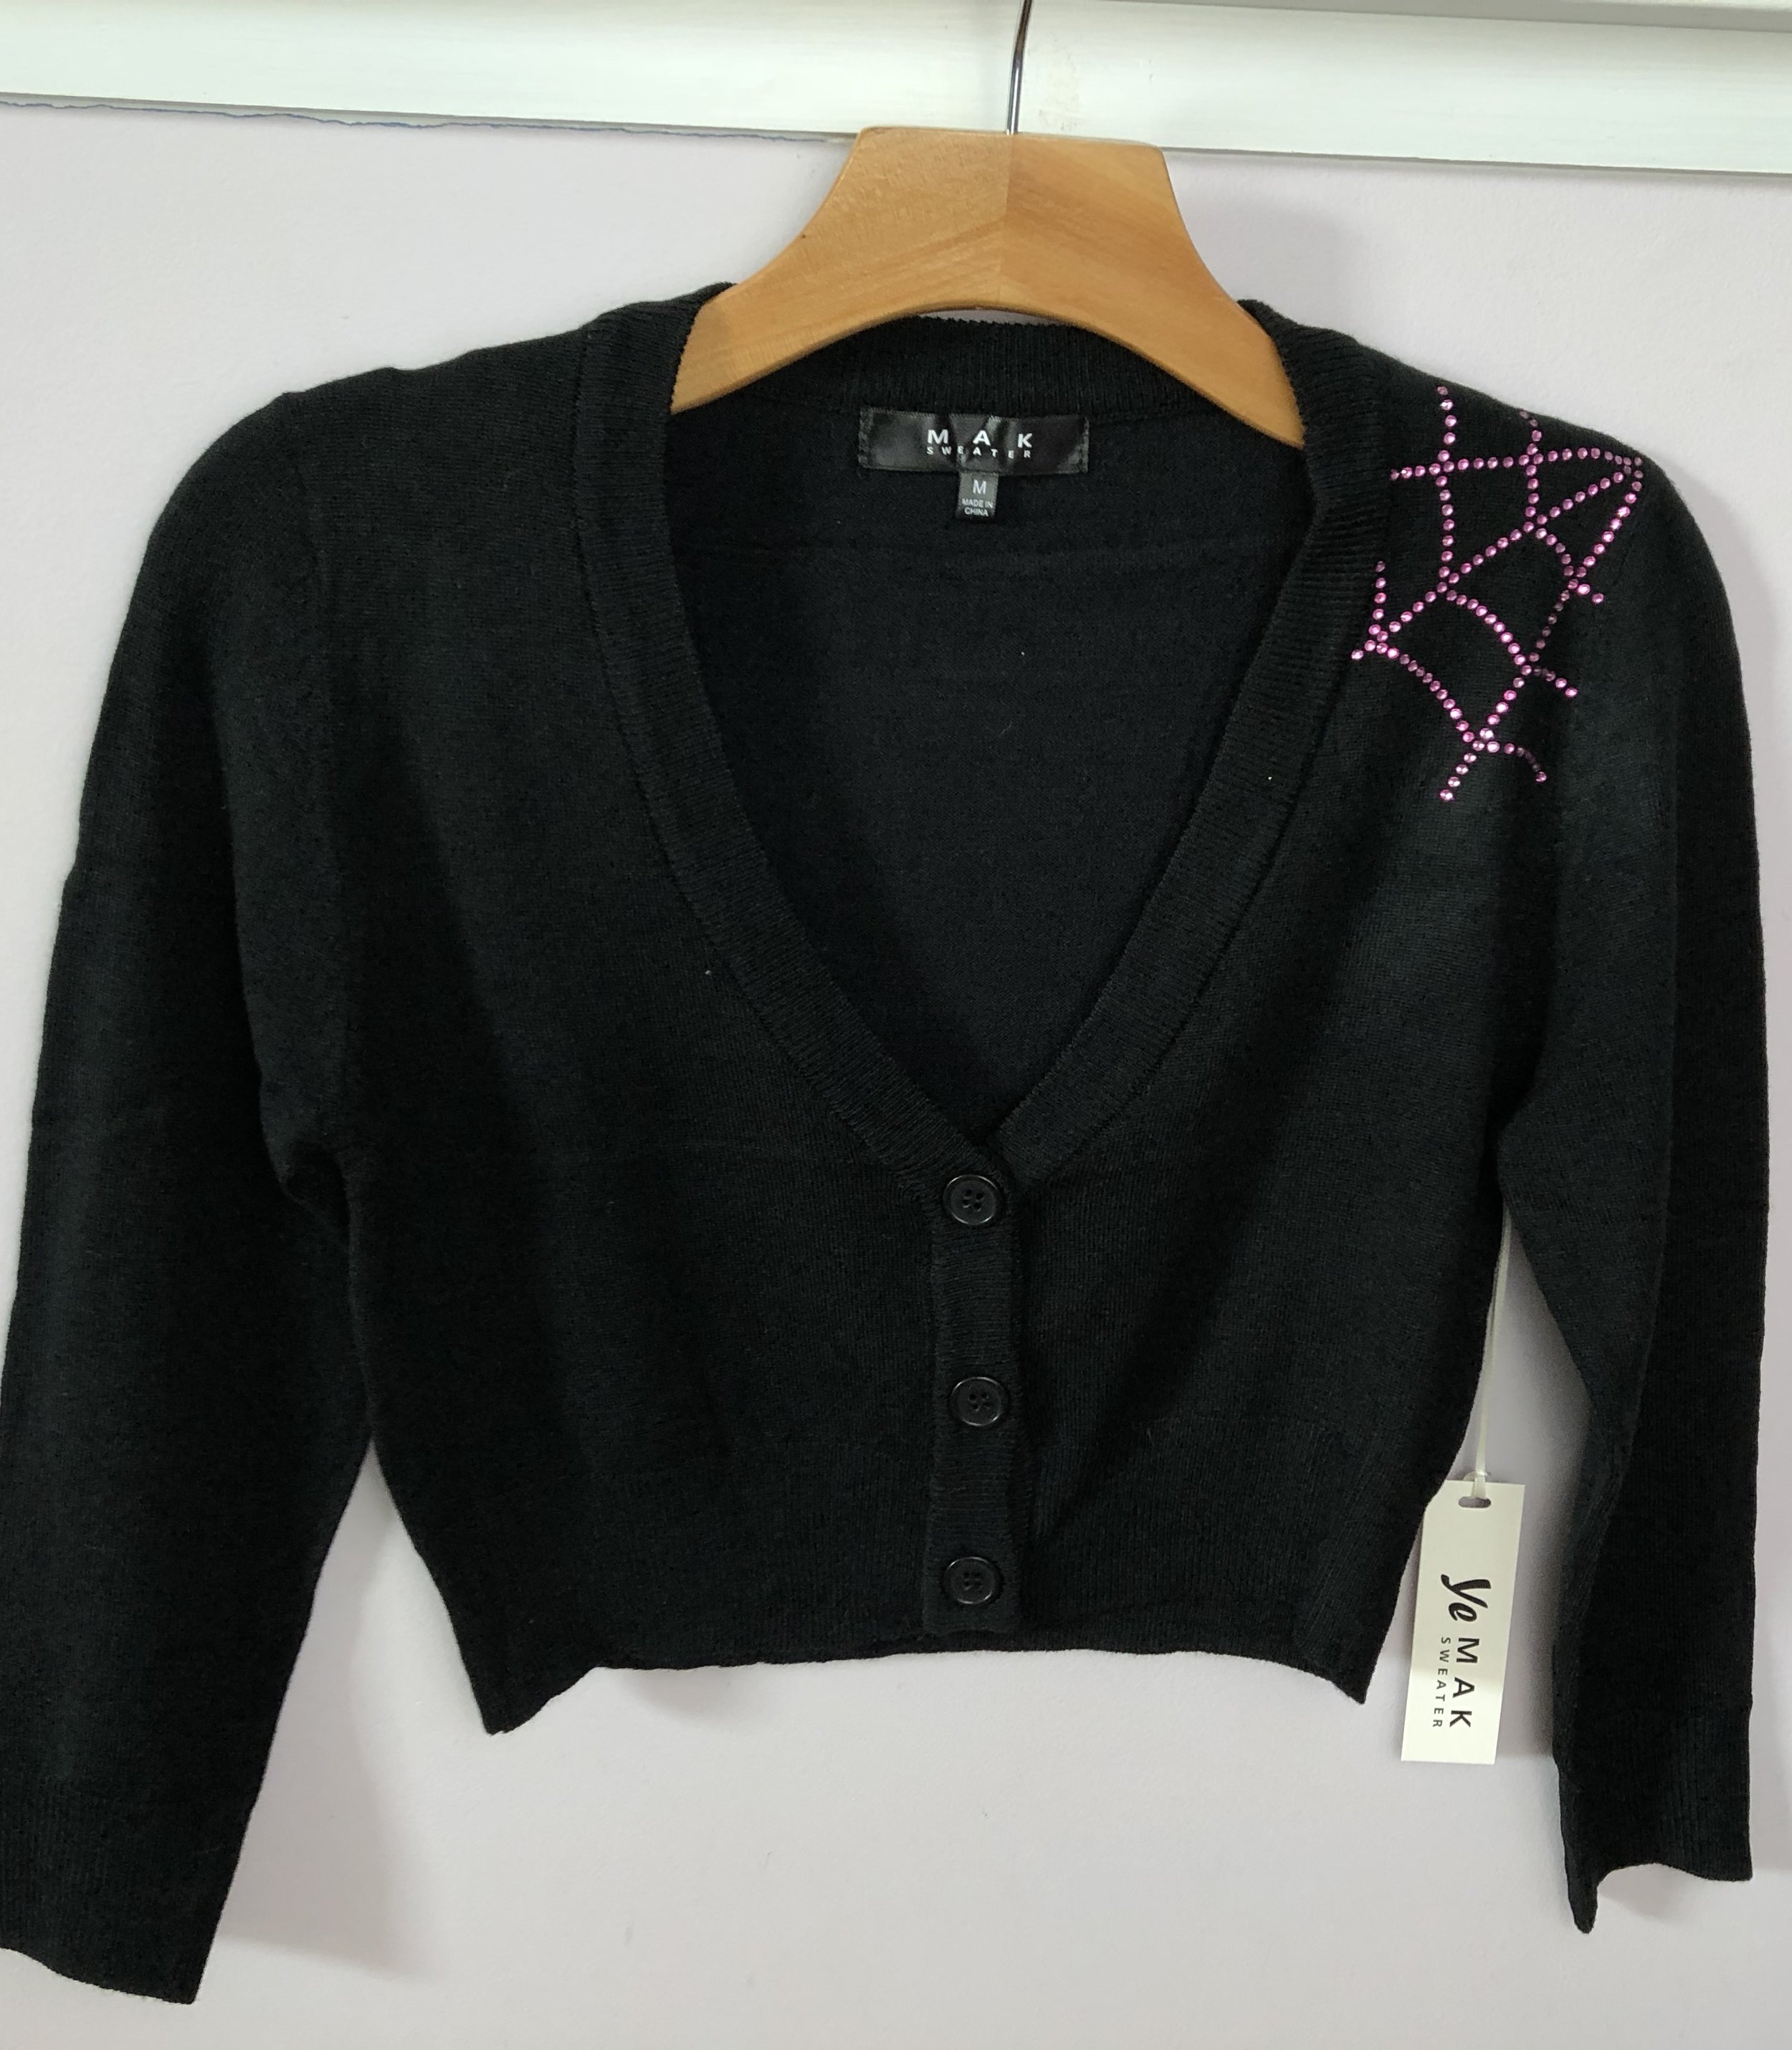 Crystal Spider Web Cardigans — Dish Rags Clothing